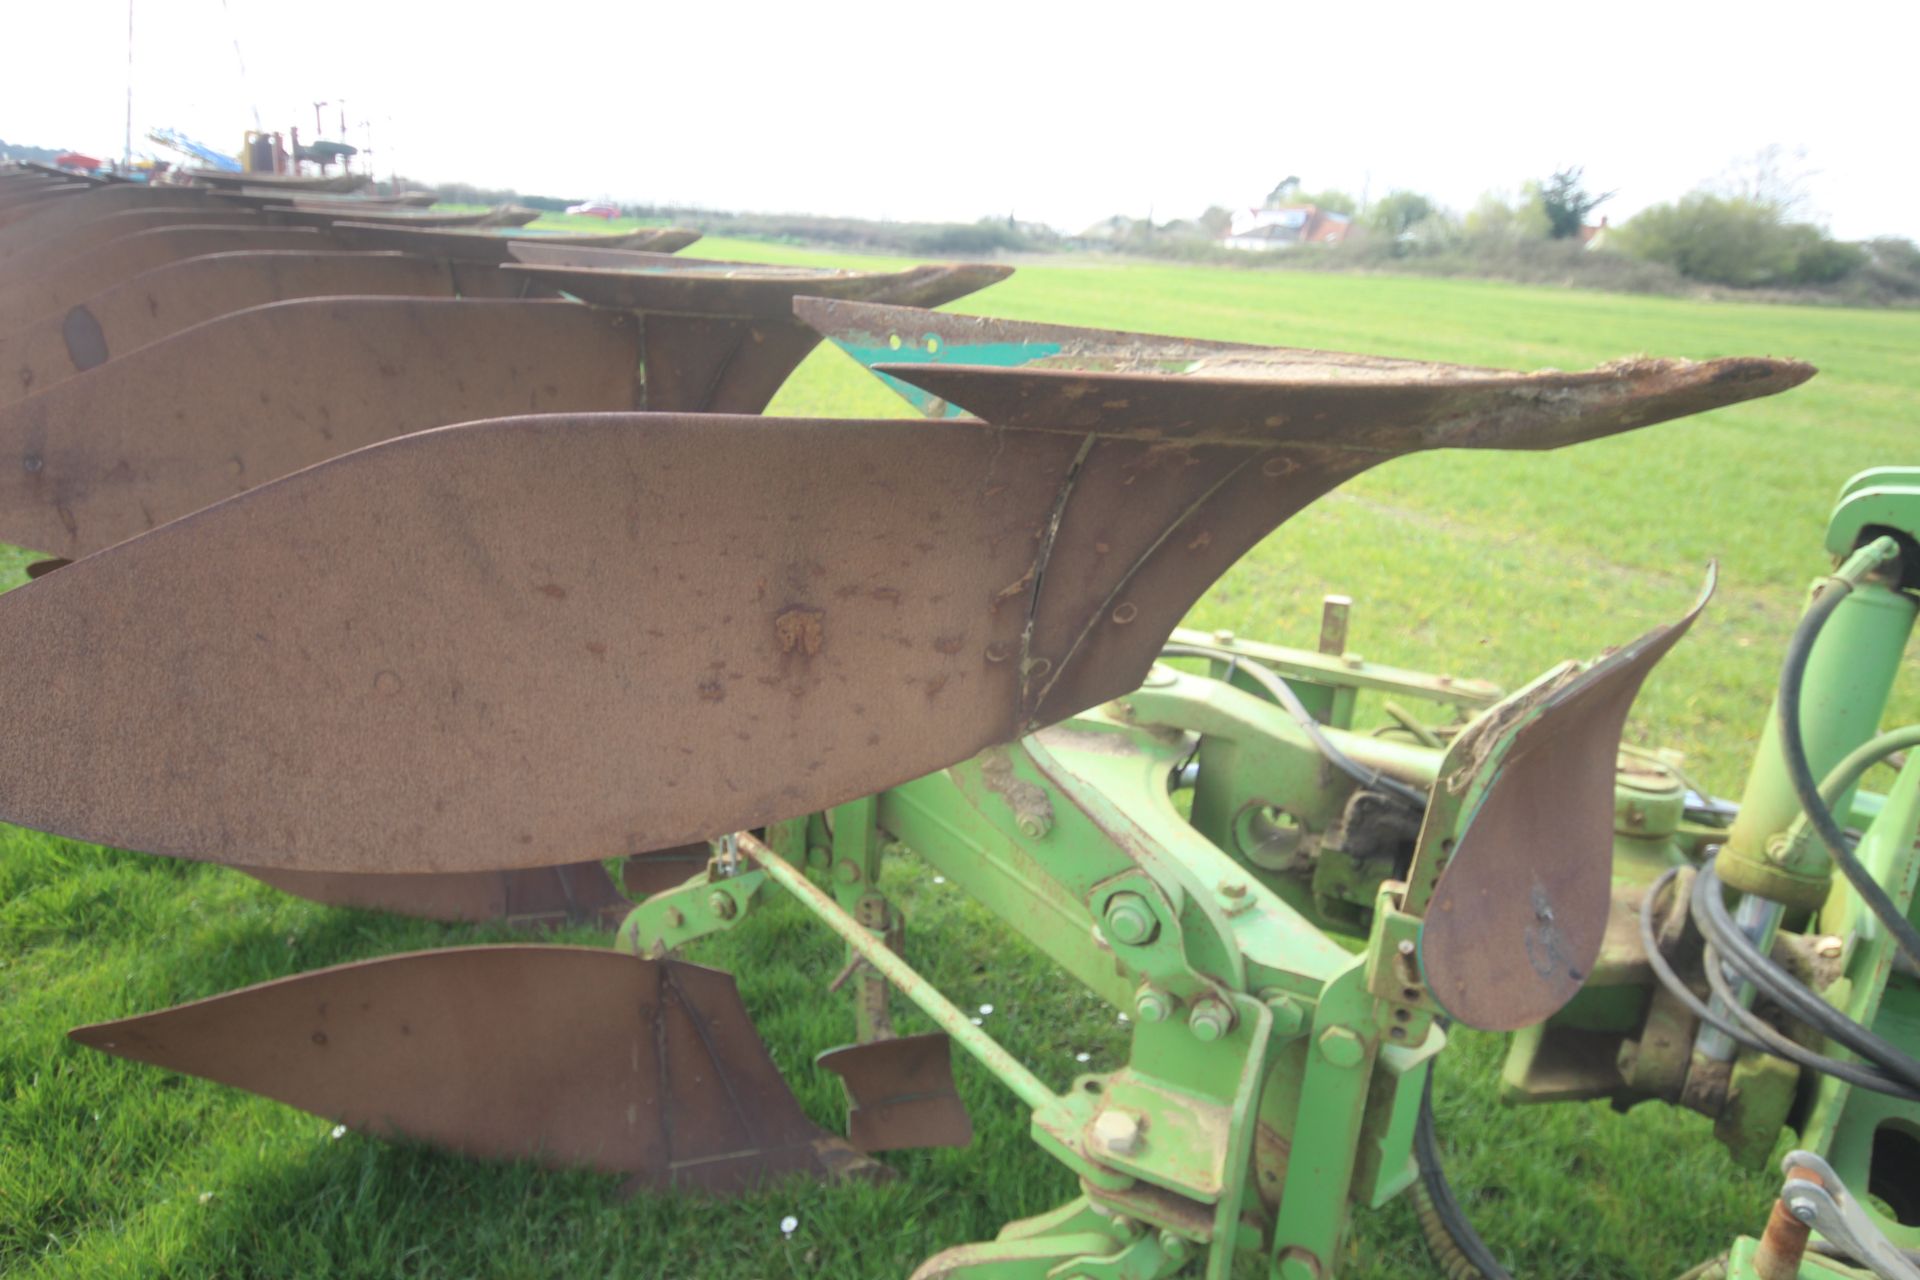 Dowdeswell 140 MA 5+1F reversible plough. With hydraulic press arm. Refurbished by Agri-Hire 2019. - Image 6 of 25